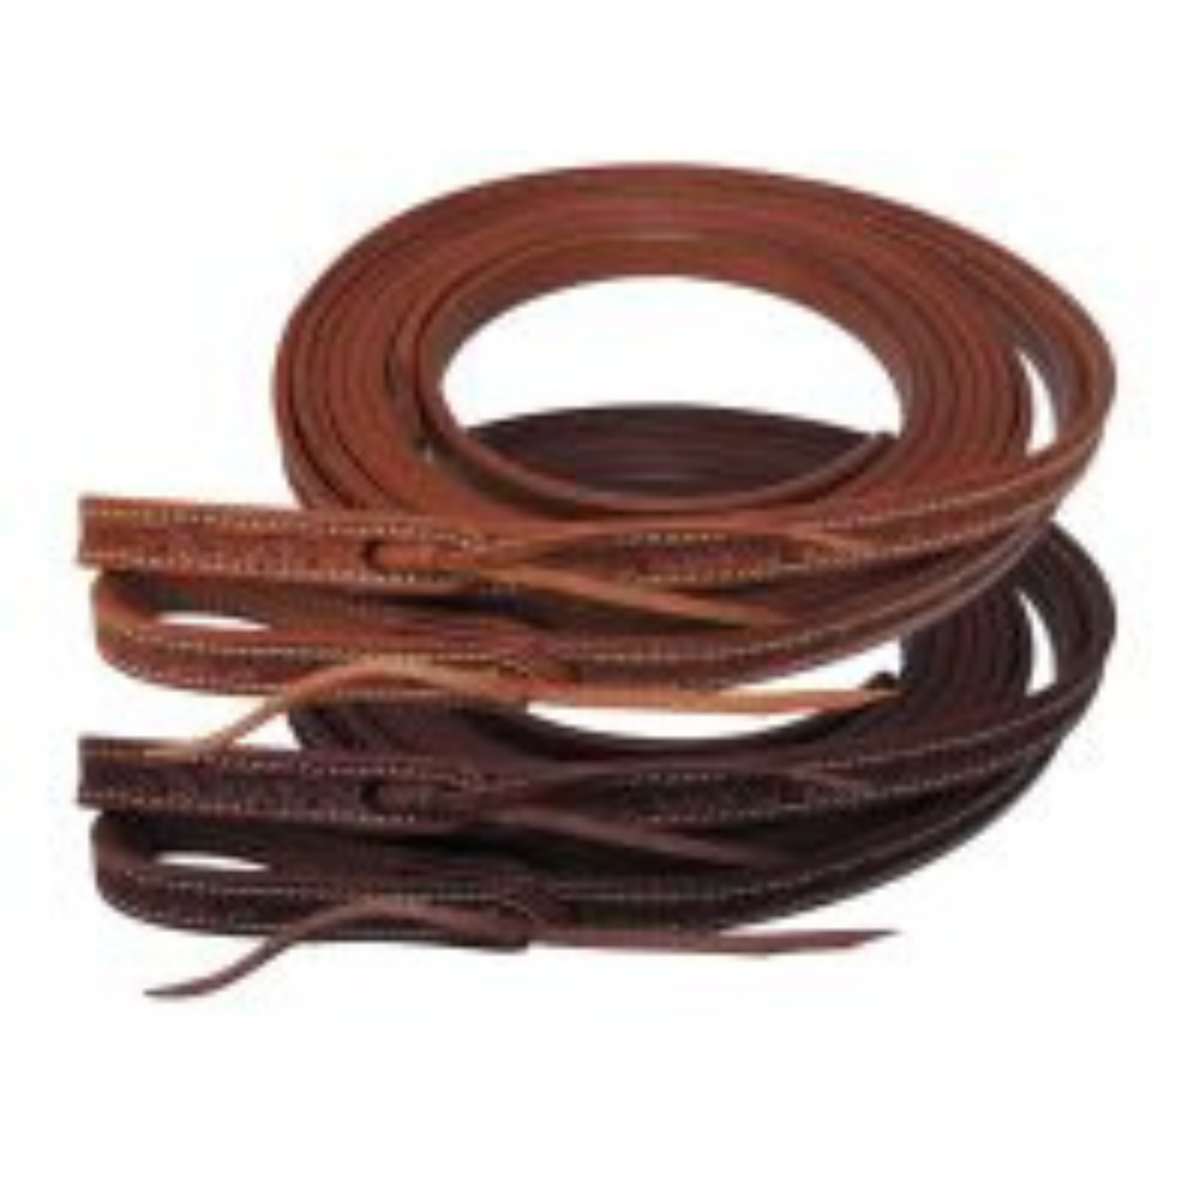  5/8" x 8ft Argentina cow leather barbed wire tooled split reins.